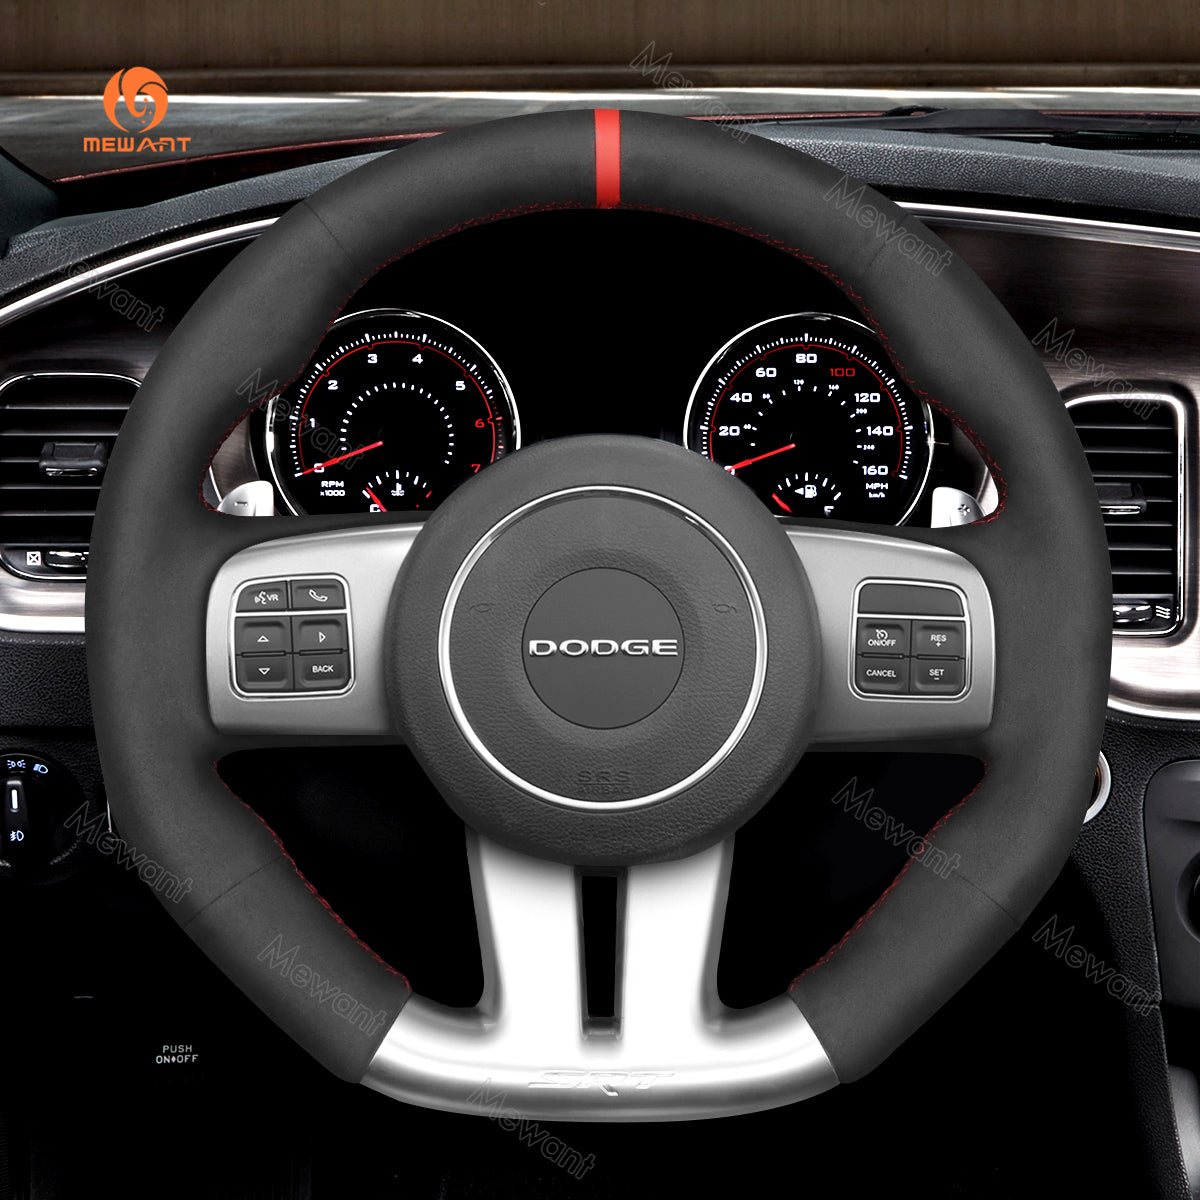 MEWANT Hand Stitch Car Steering Wheel Cover for Dodge Challenger (SRT) Charger (SRT) / for Jeep Grand Cherokee (SRT)